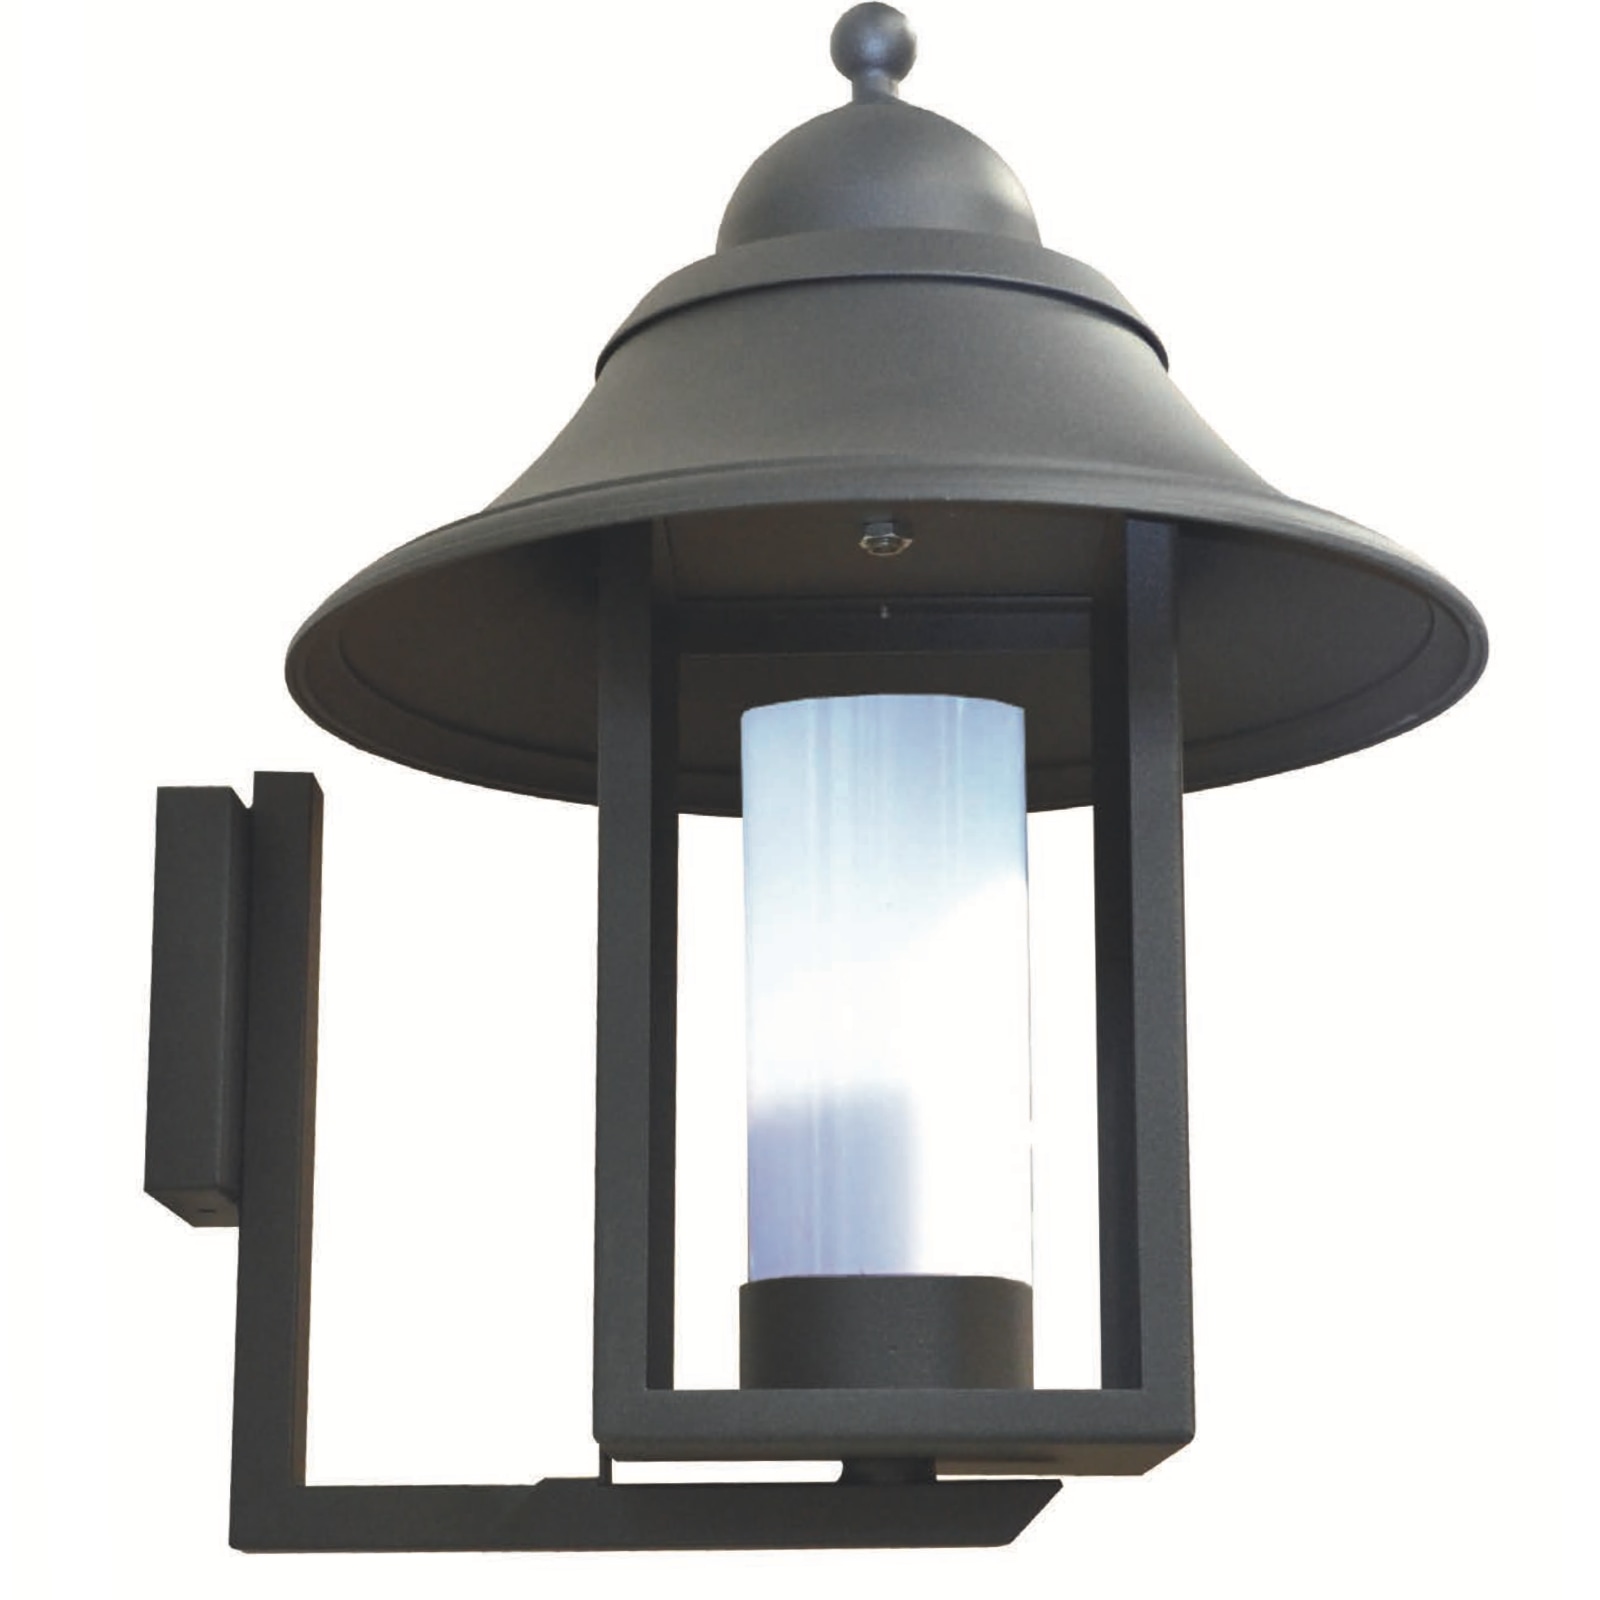 Historic Stainless Steel Wall Light with Roof